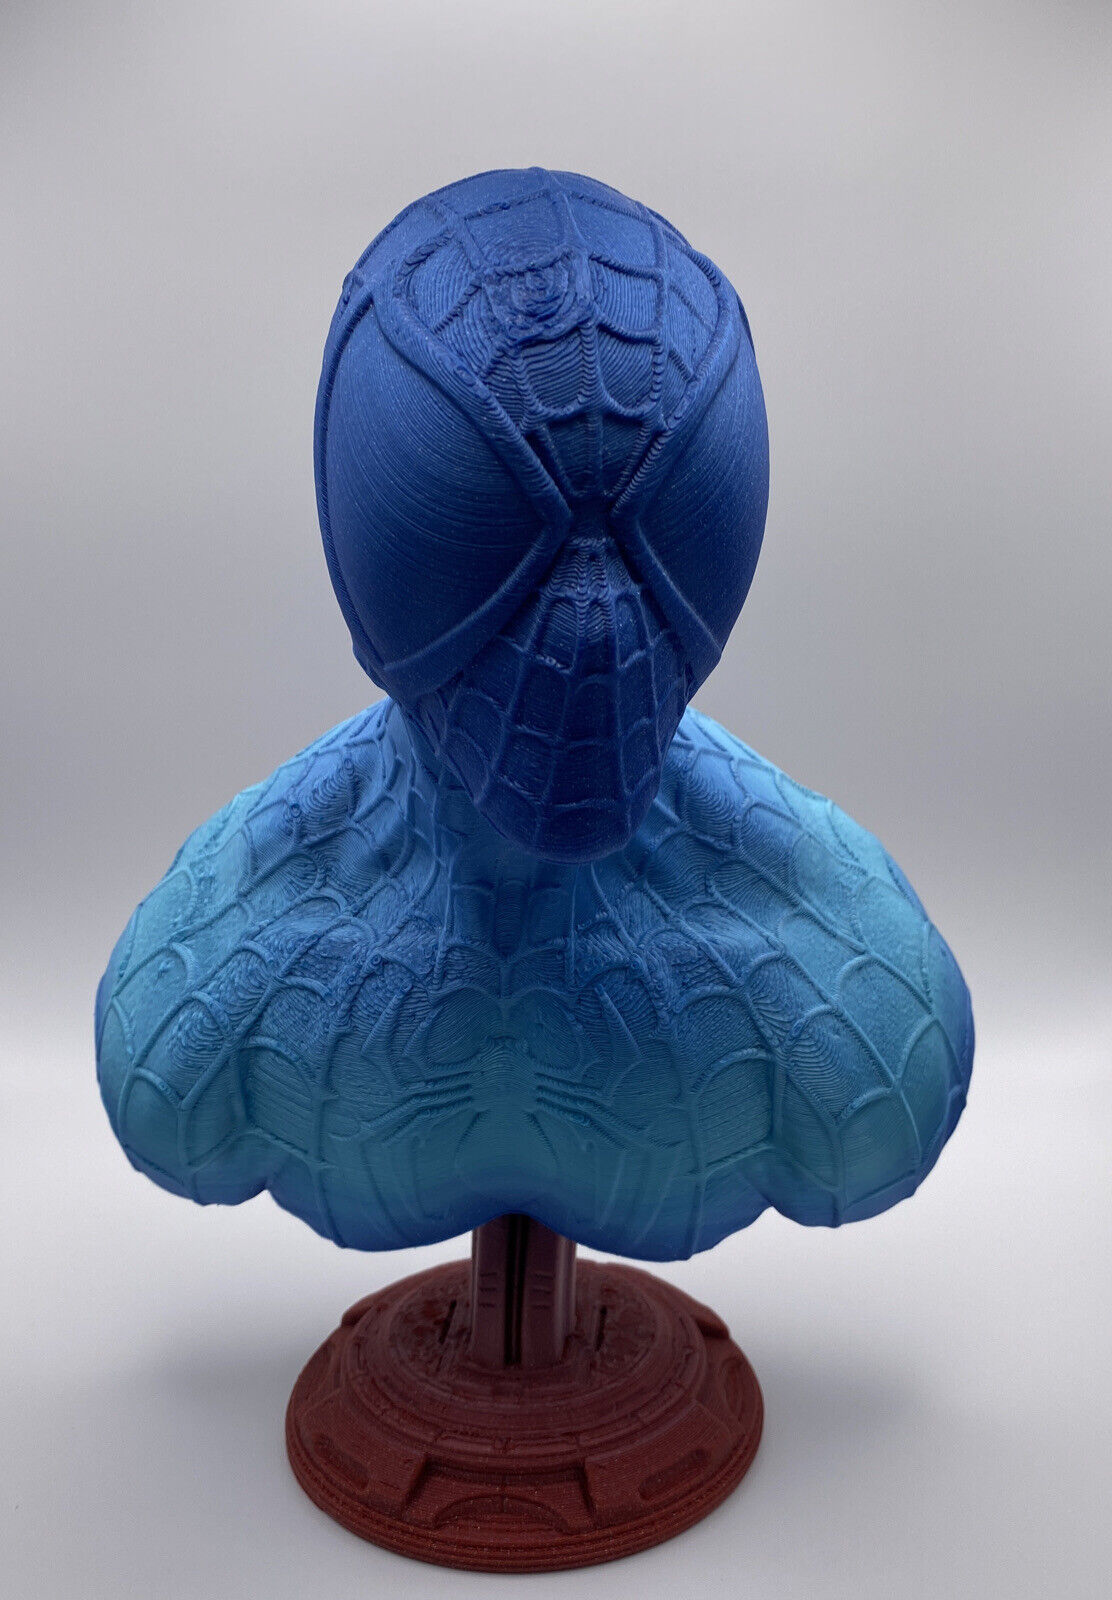 Spiderman Statue 3D Printed | Paintable Plastic Filament | 7.5 Inches Tall